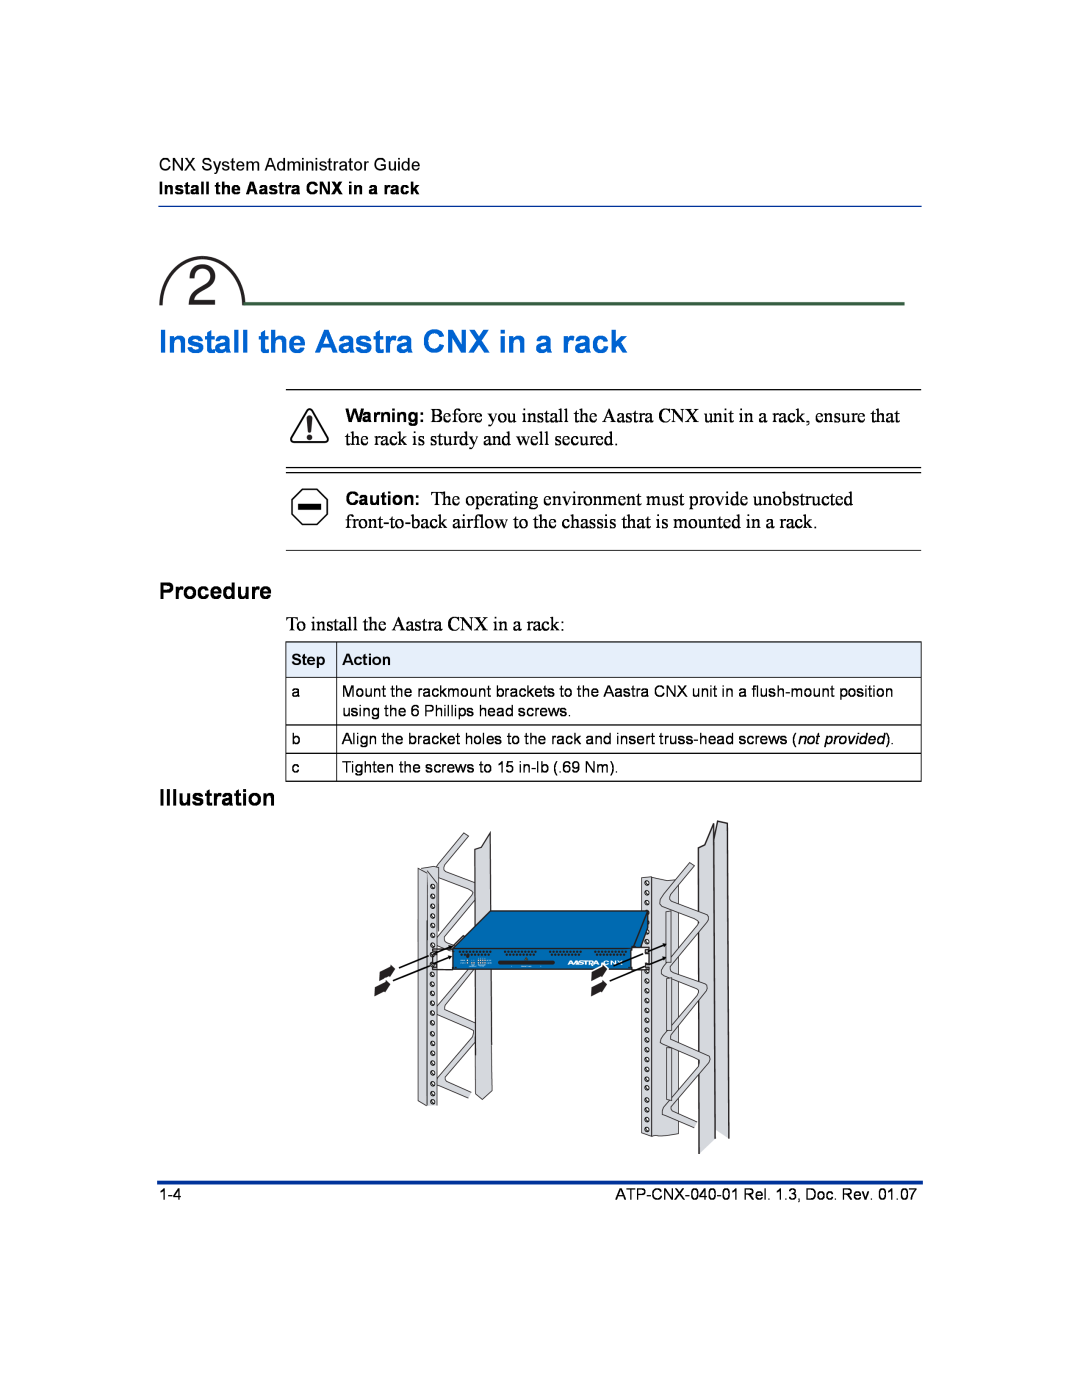 Aastra Telecom ATP-CNX-040-01 manual Install the Aastra CNX in a rack, Procedure, Illustration 